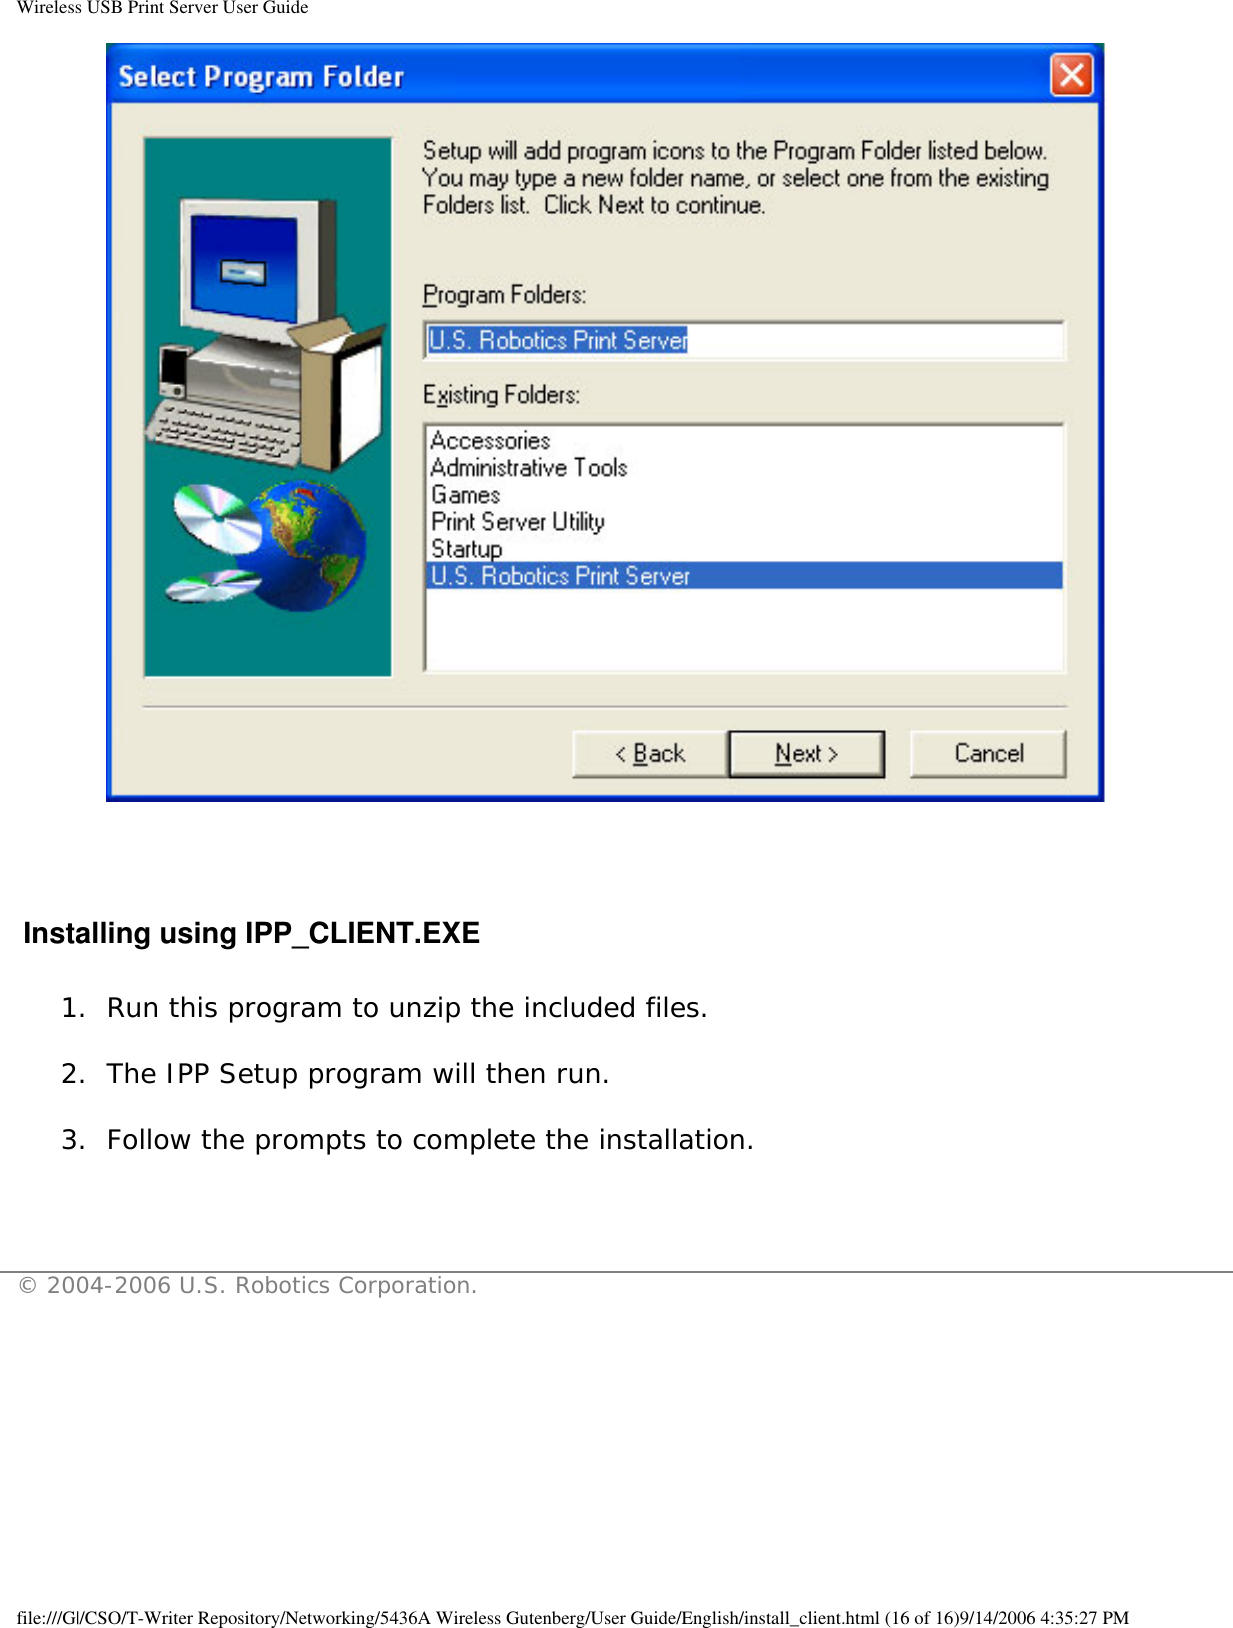 Wireless USB Print Server User Guide  Installing using IPP_CLIENT.EXE1.  Run this program to unzip the included files. 2.  The IPP Setup program will then run. 3.  Follow the prompts to complete the installation.  © 2004-2006 U.S. Robotics Corporation.file:///G|/CSO/T-Writer Repository/Networking/5436A Wireless Gutenberg/User Guide/English/install_client.html (16 of 16)9/14/2006 4:35:27 PM